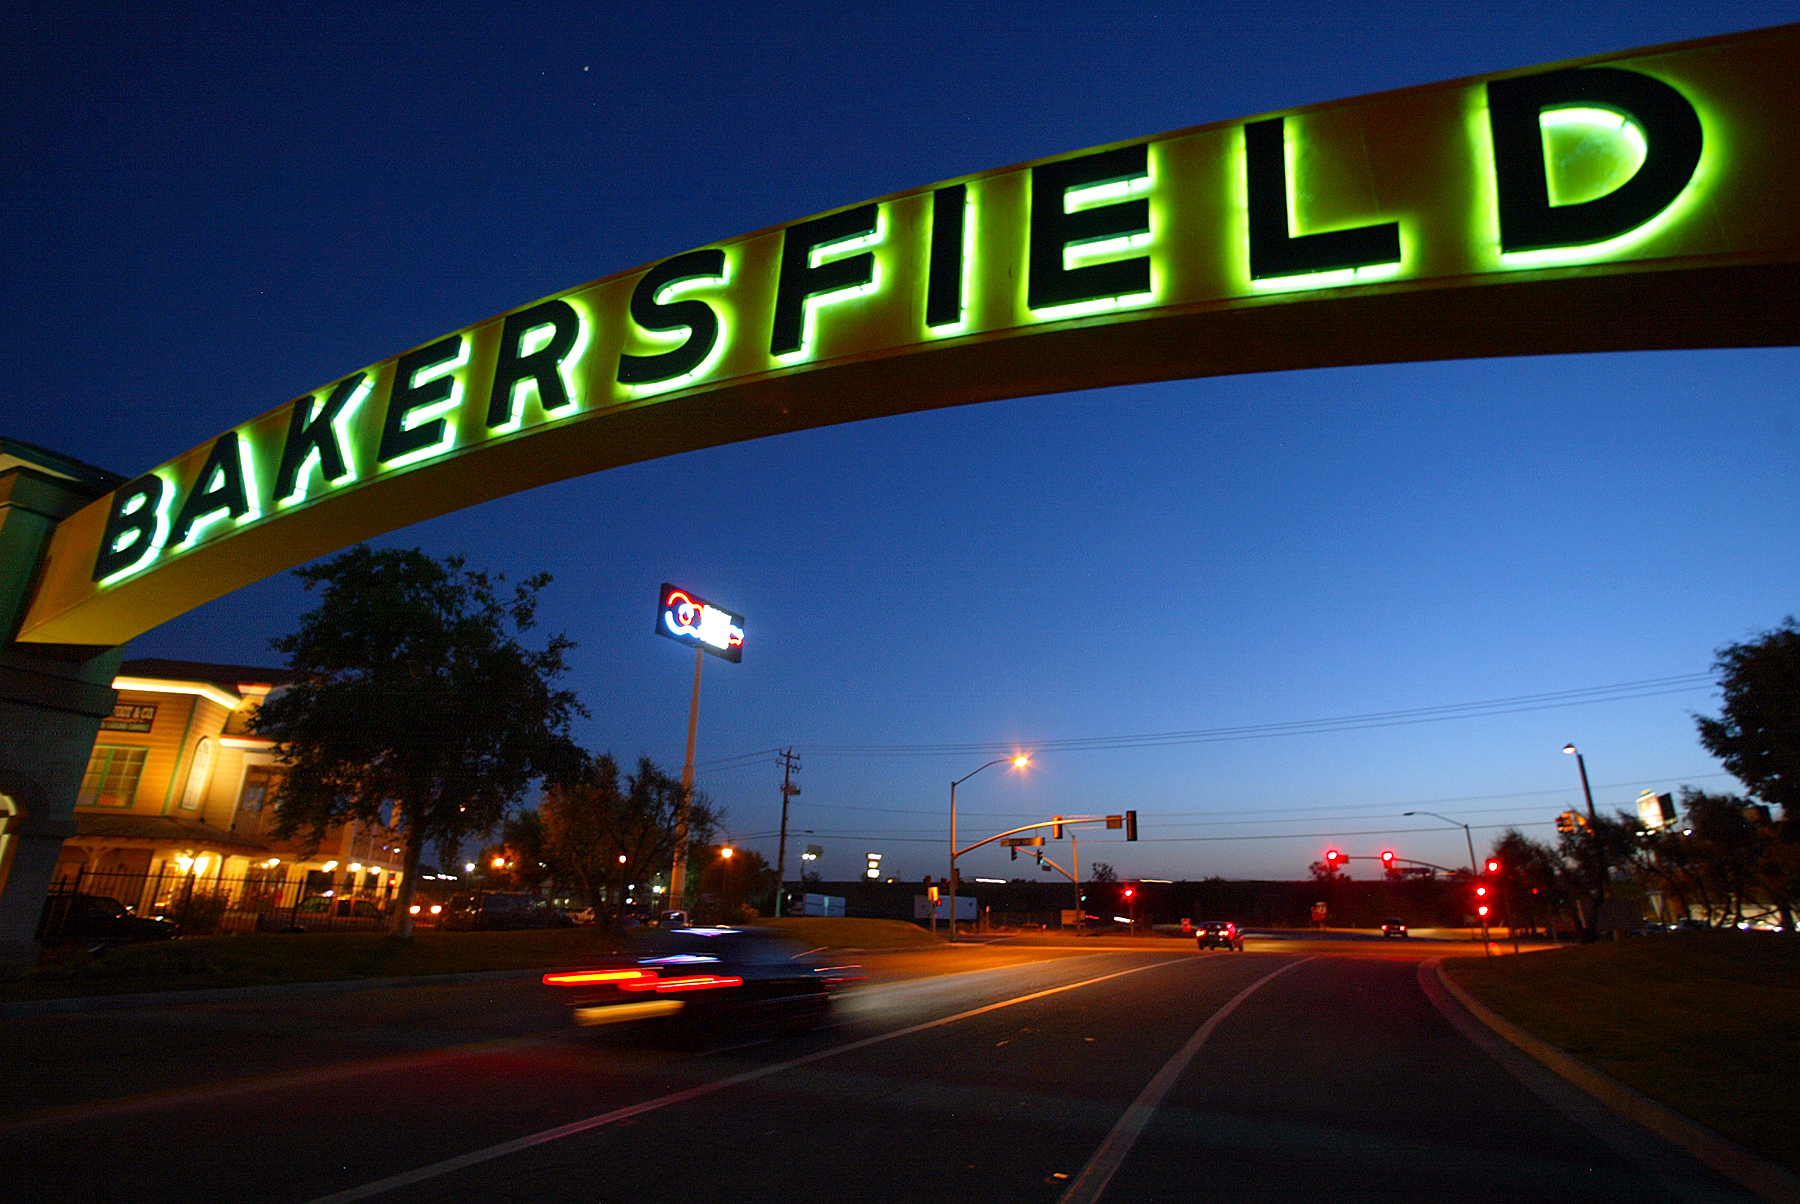 Neon sign welcomes visitors to Bakersfield. Country western star Buck Owens, built a $10million 'Buck Owen's Crystal Palace' at Highway 99, right next to the Crystal Palace is the huge Yellow and black BAKERSFIELD sign of Sillect street that we all see from the 99 freeway Bakersfield is a city increasingly popular with Southern California families because its houses are affordable and its schools good and it still has a smalltown feel. (Photo by Spencer Weiner/Los Angeles Times via Getty Images)